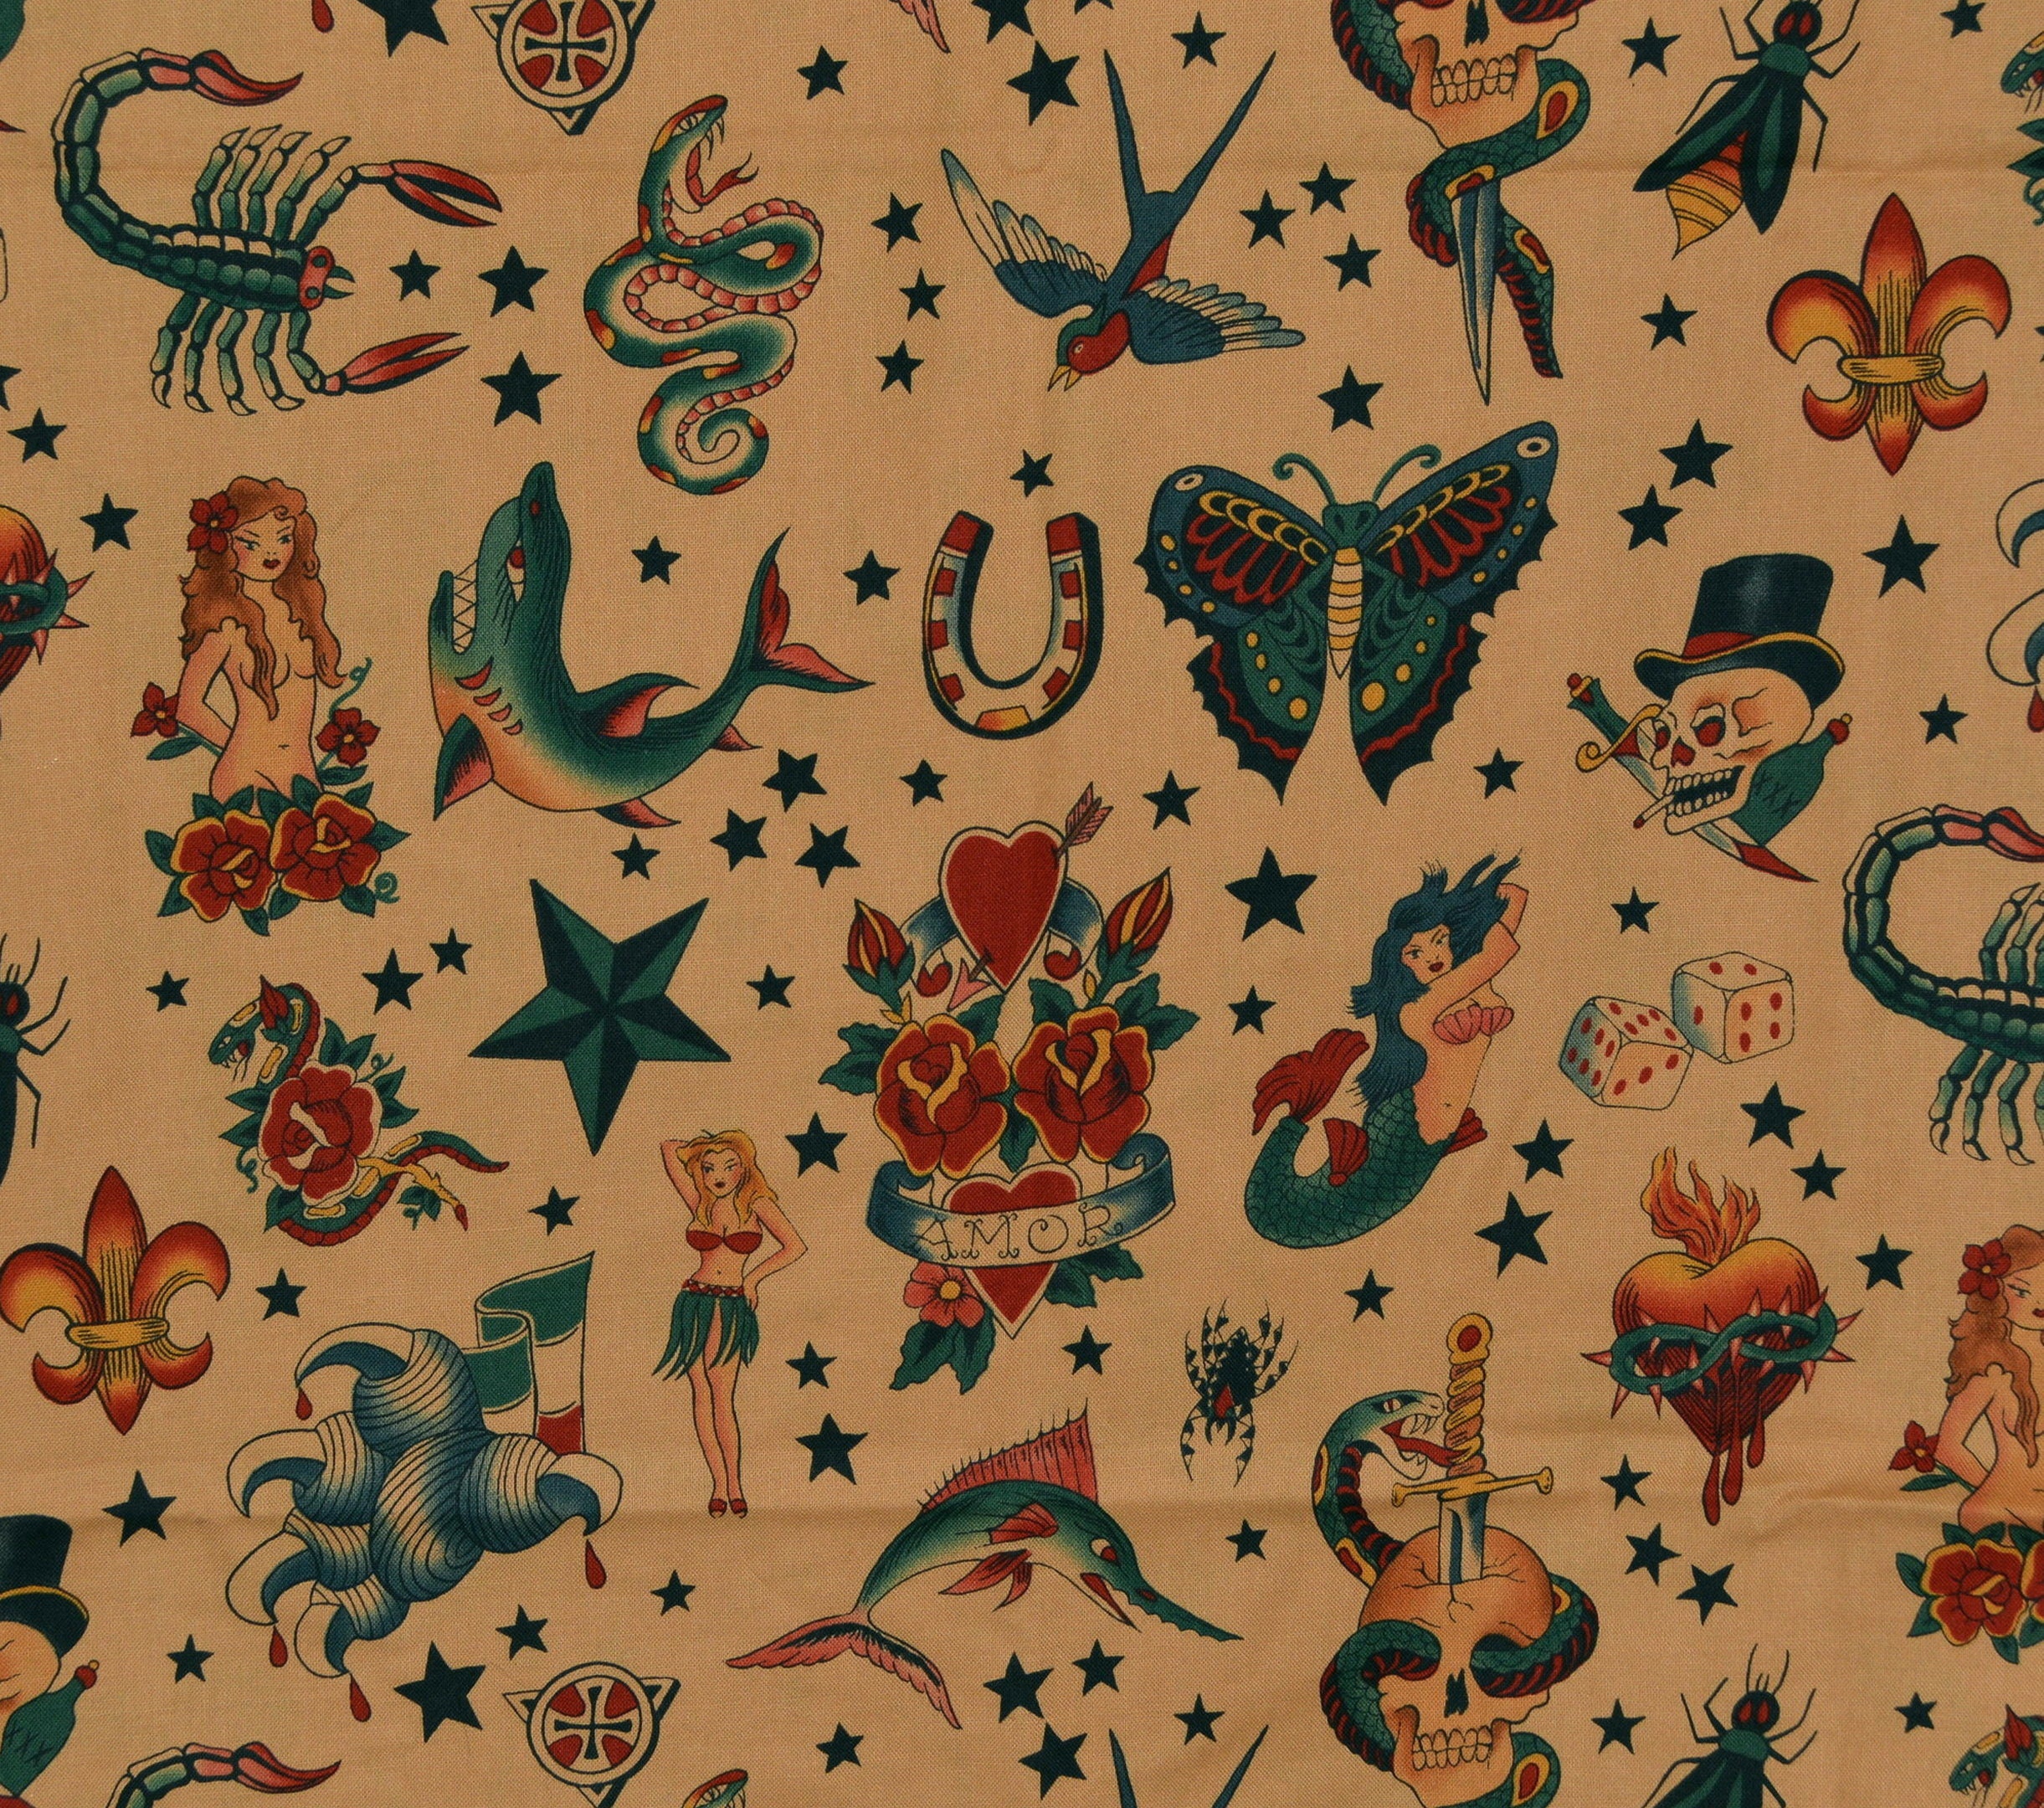 Tattoo fabric Pin up or Sailor Jerry tattoos Alexander Henry fabric